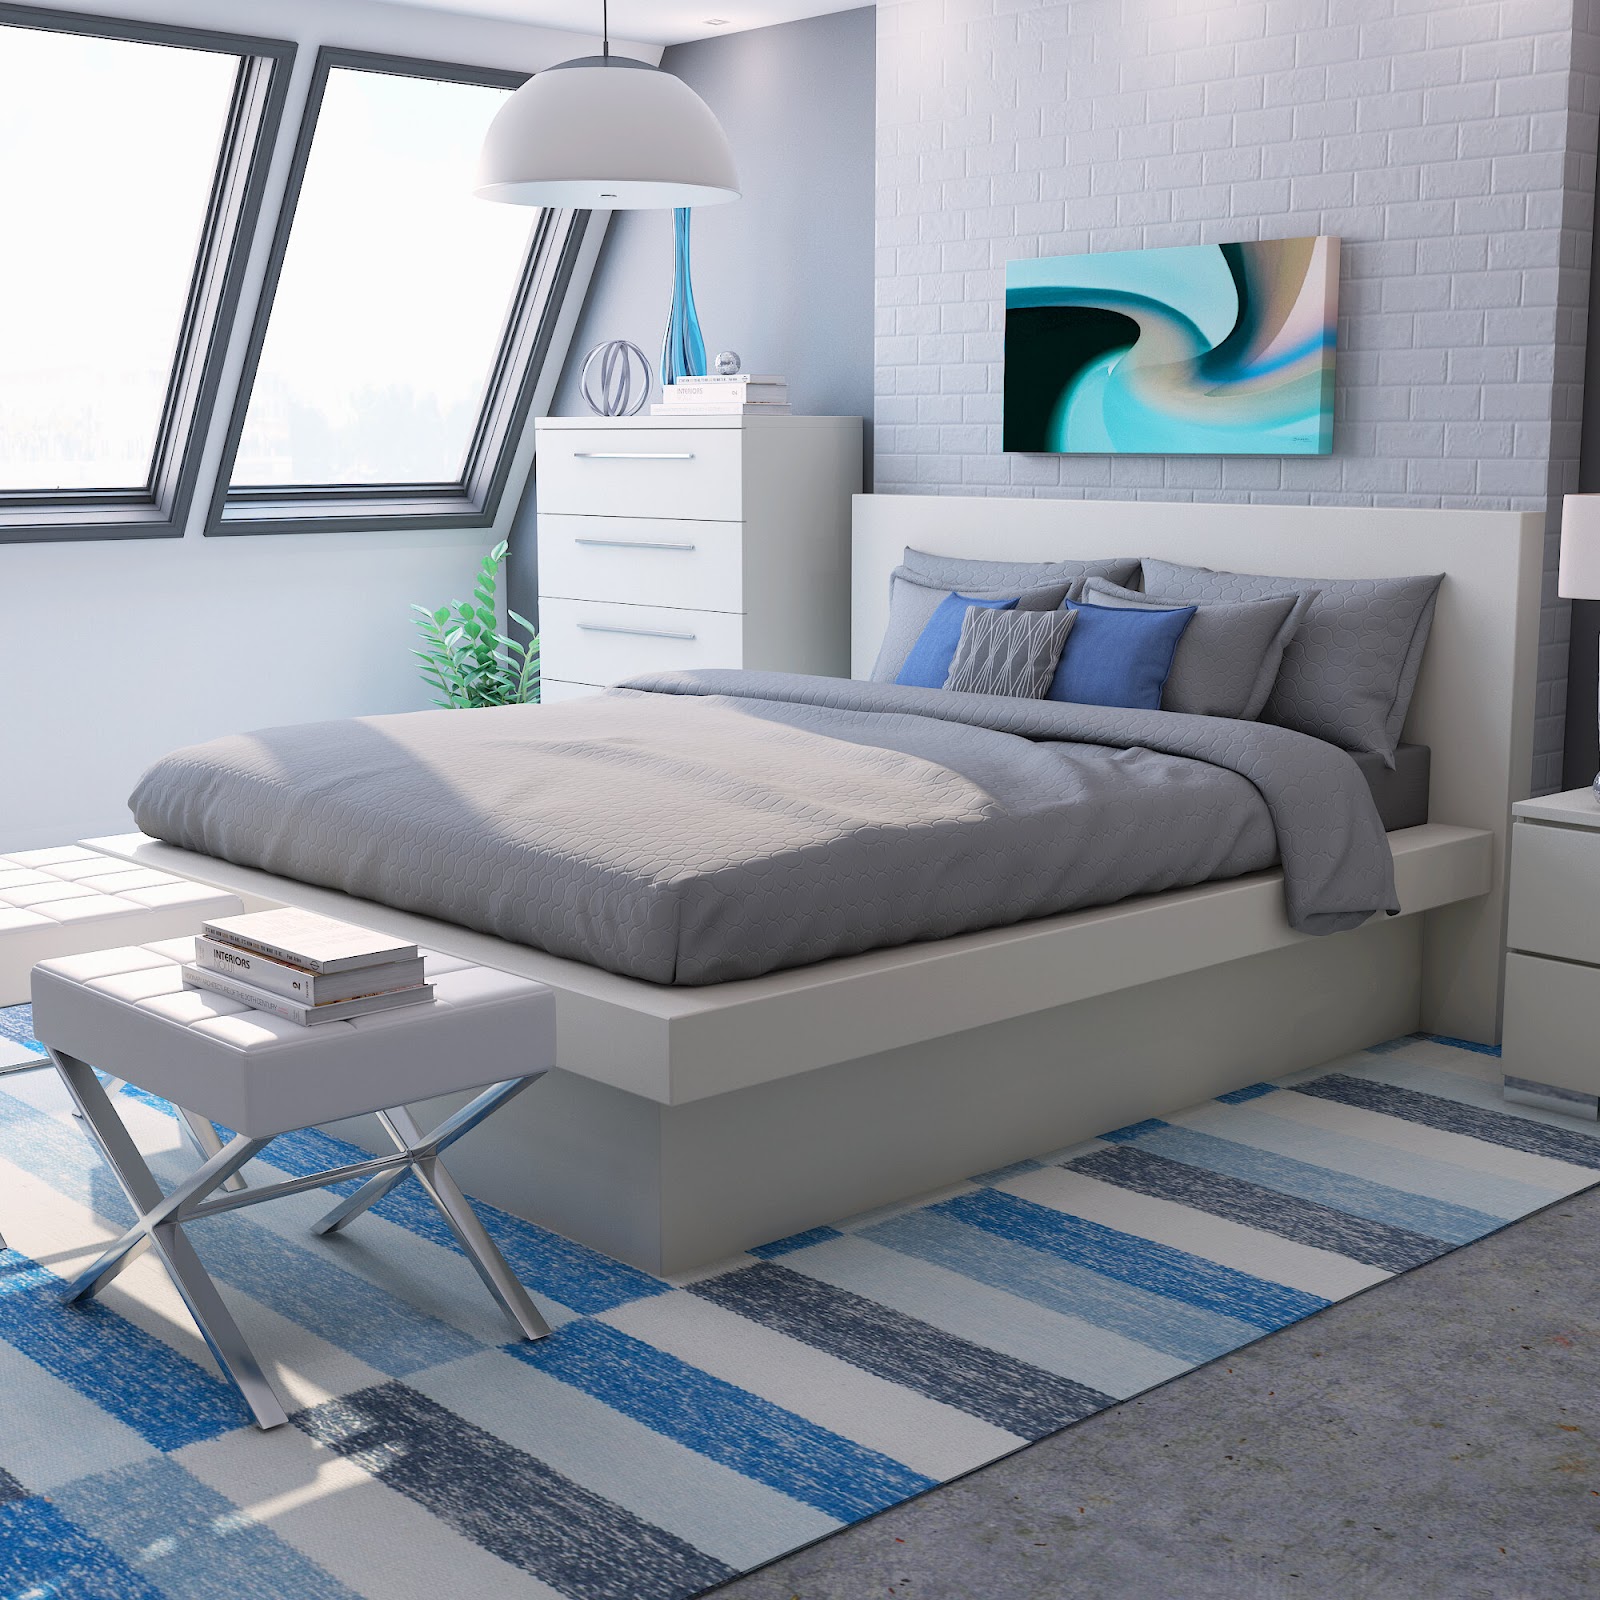 Blue and gray themed platform bed